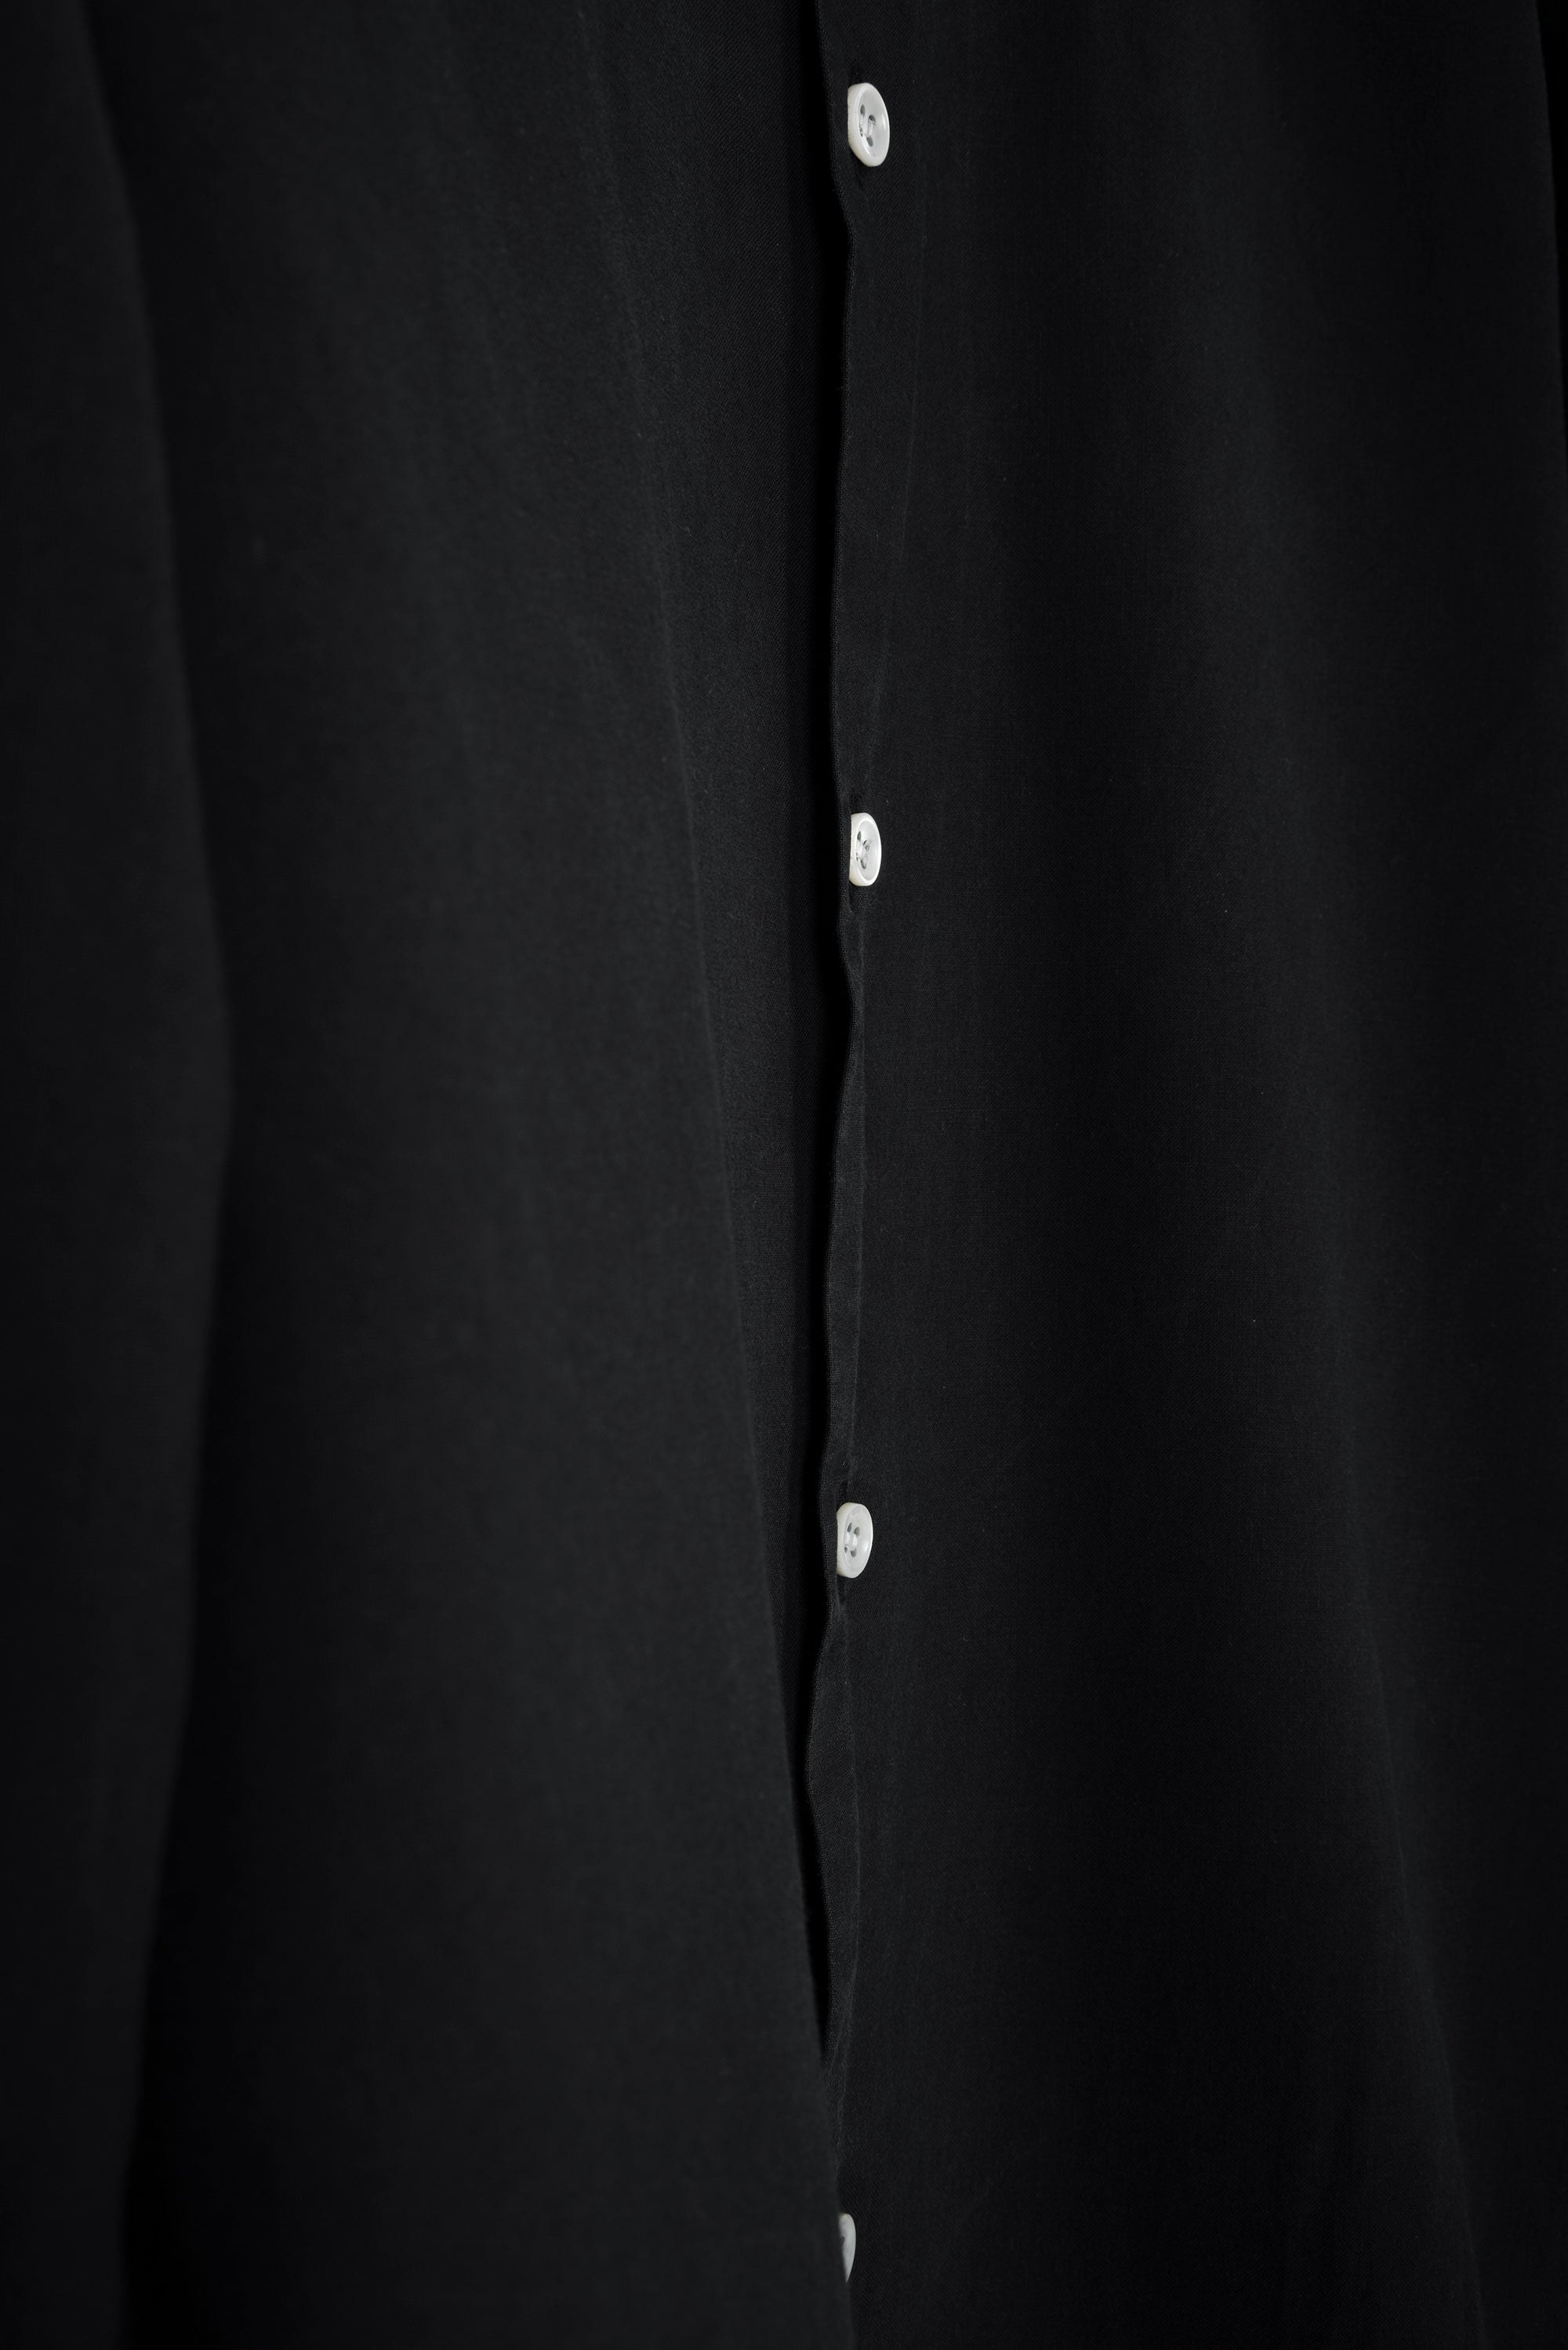 1999 S/S BLACK BUTTON-DOWN SHIRT IN BRUSHED COTTON